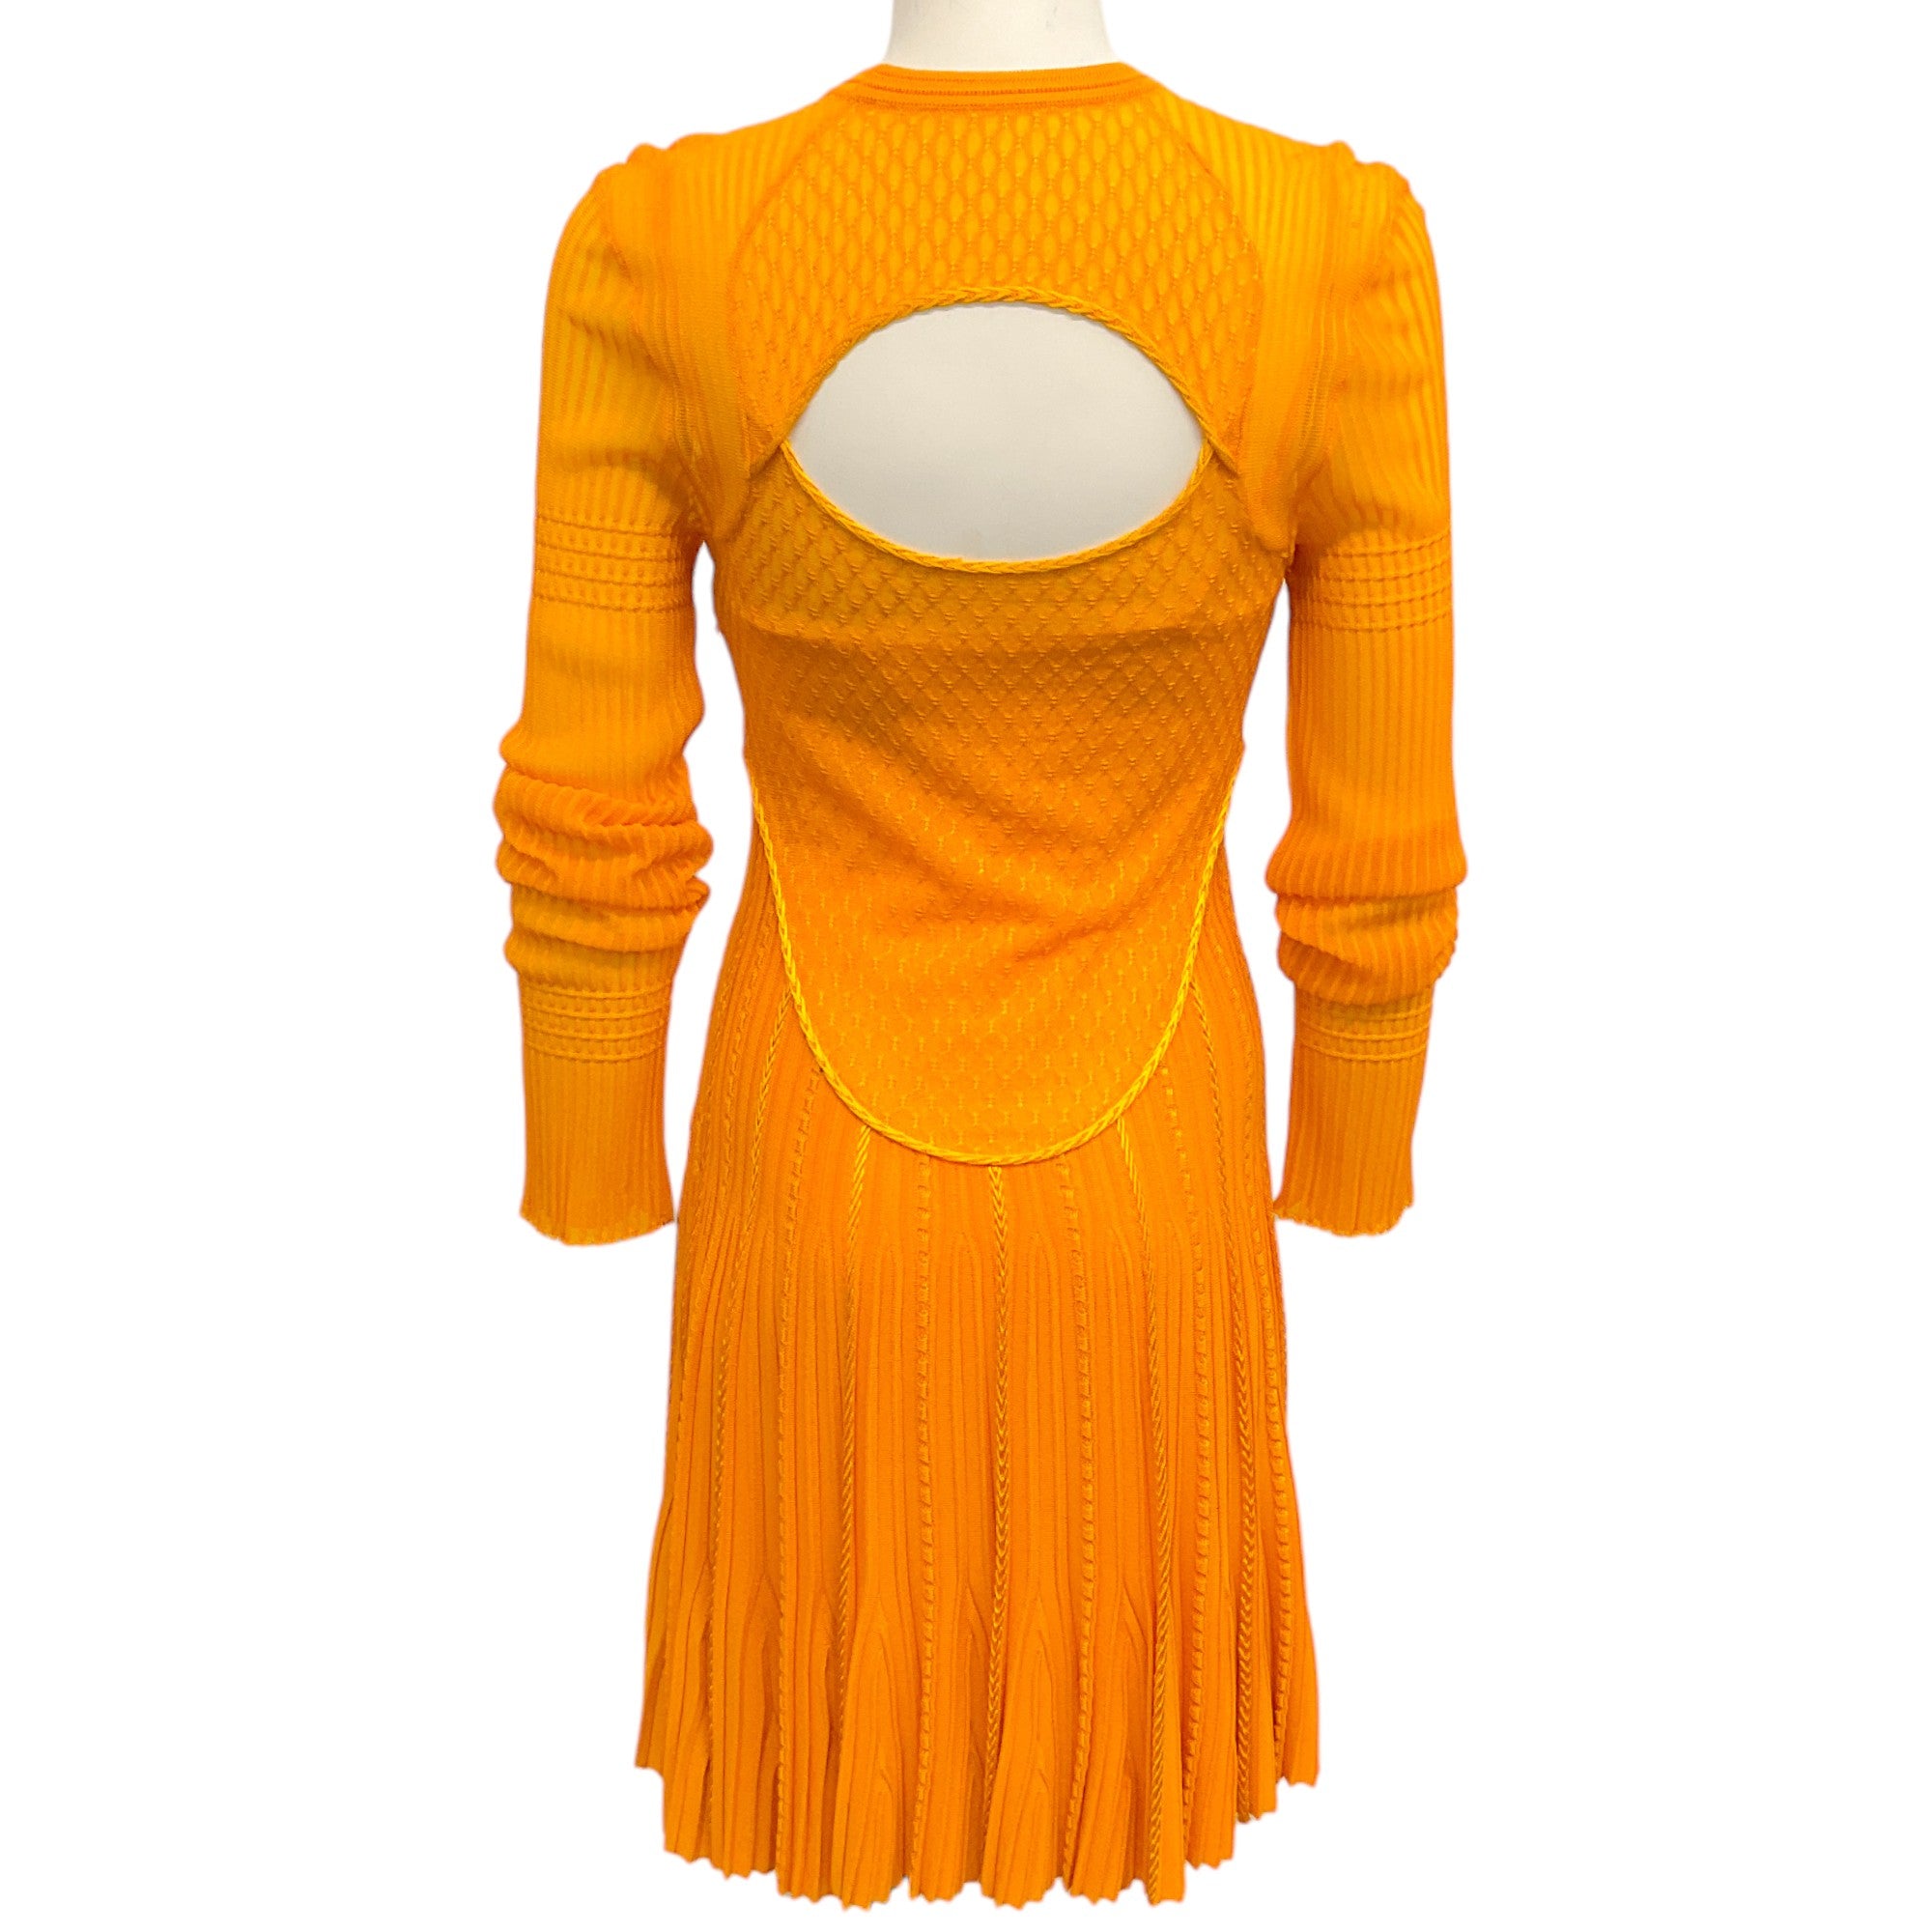 Givenchy Golden Yellow Knit Dress with Slip